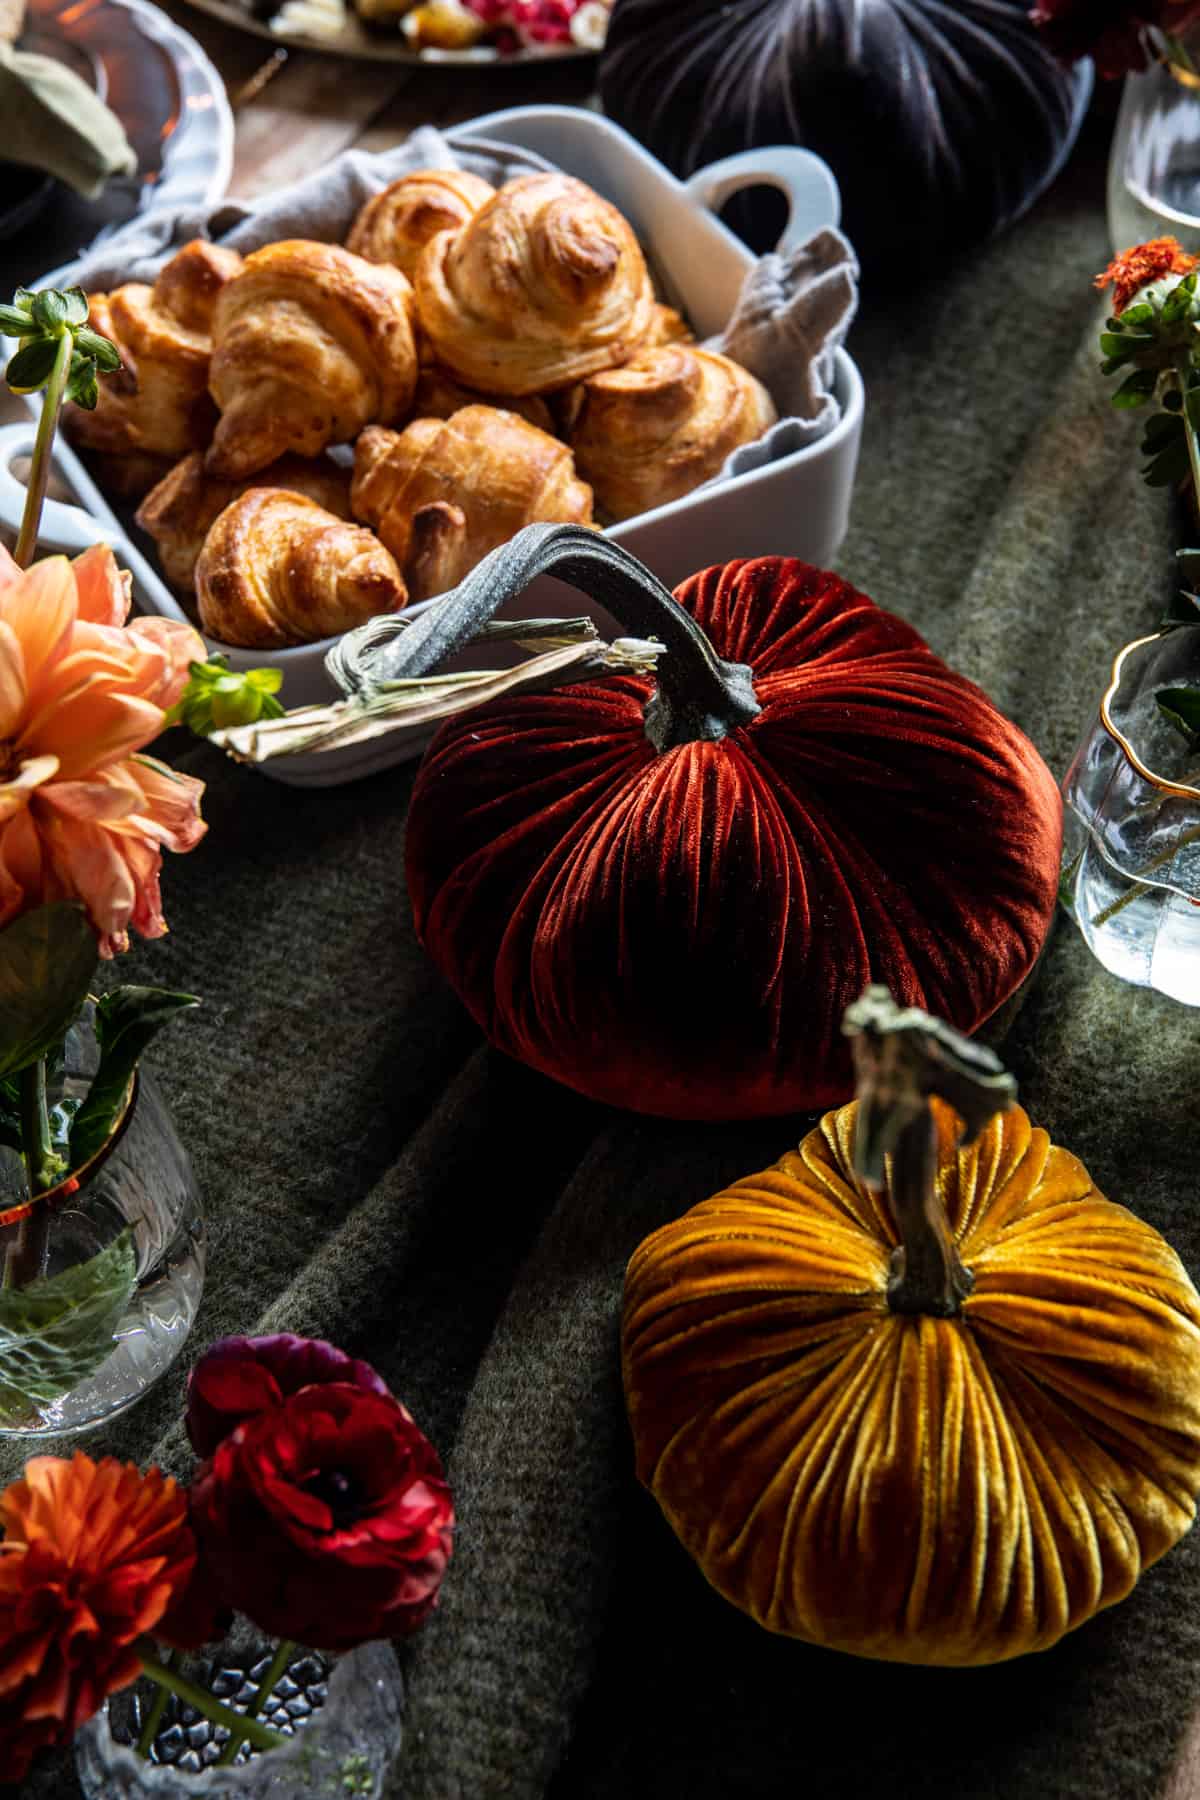 Our 2022 Thanksgiving Menu and Guide – the Quick and Cozy Pumpkin Menu | halfbakedharvest.com